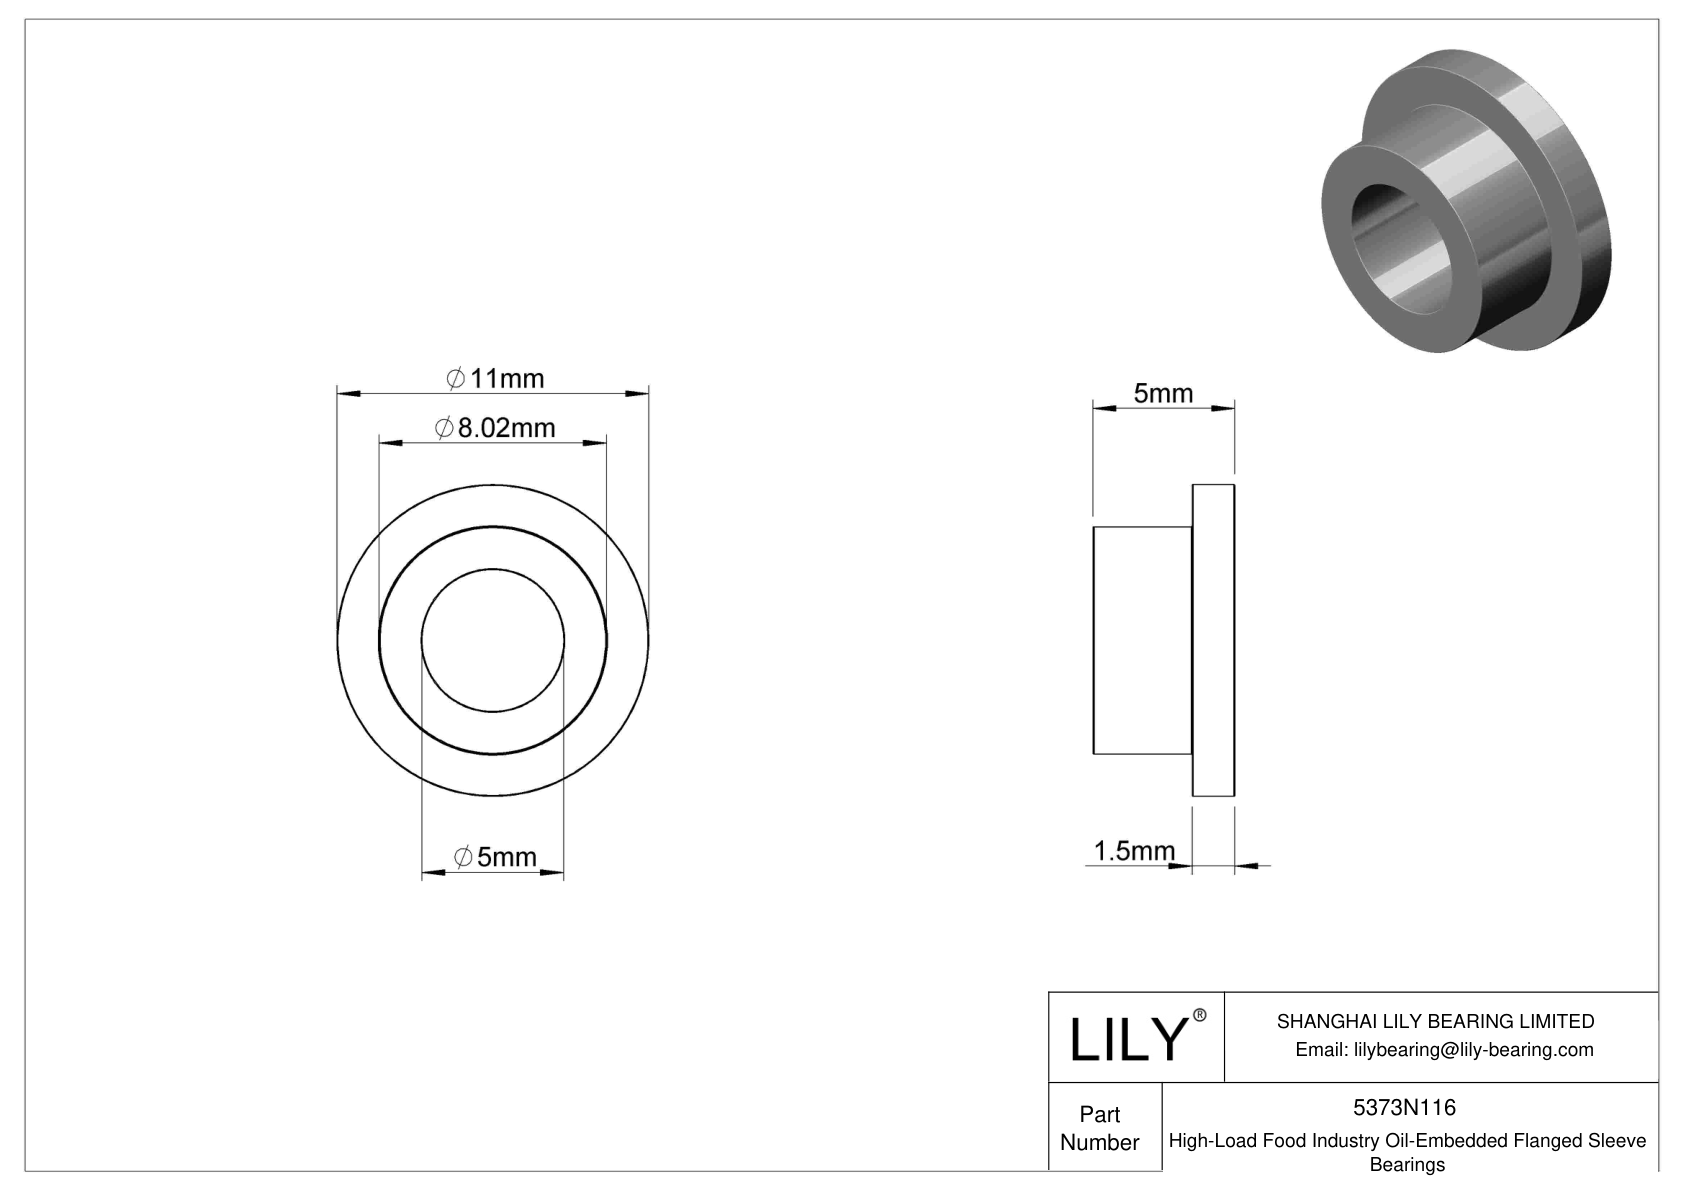 FDHDNBBG High-Load Food Industry Oil-Embedded Flanged Sleeve Bearings cad drawing